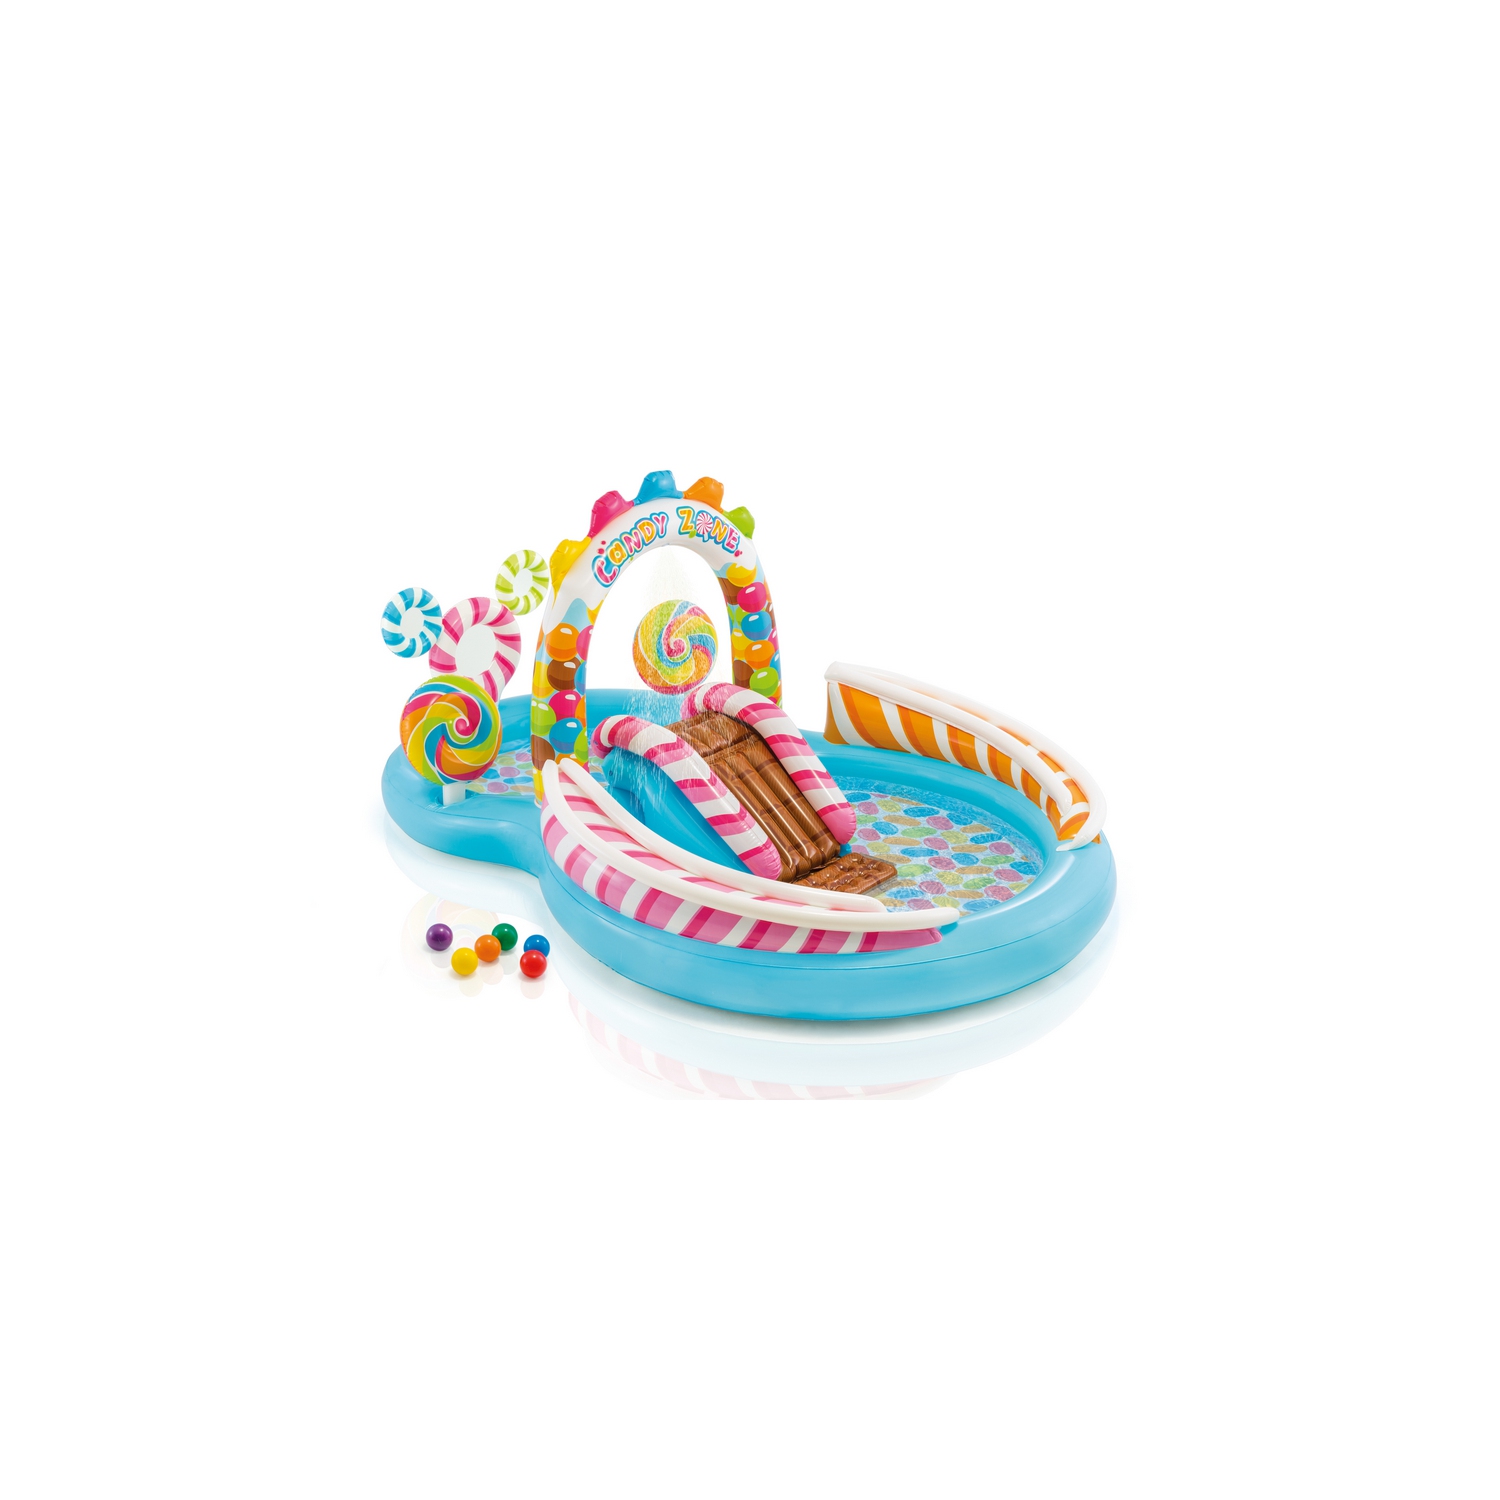 INTEX - CANDY ZONE PLAY CENTER, Age: 2+